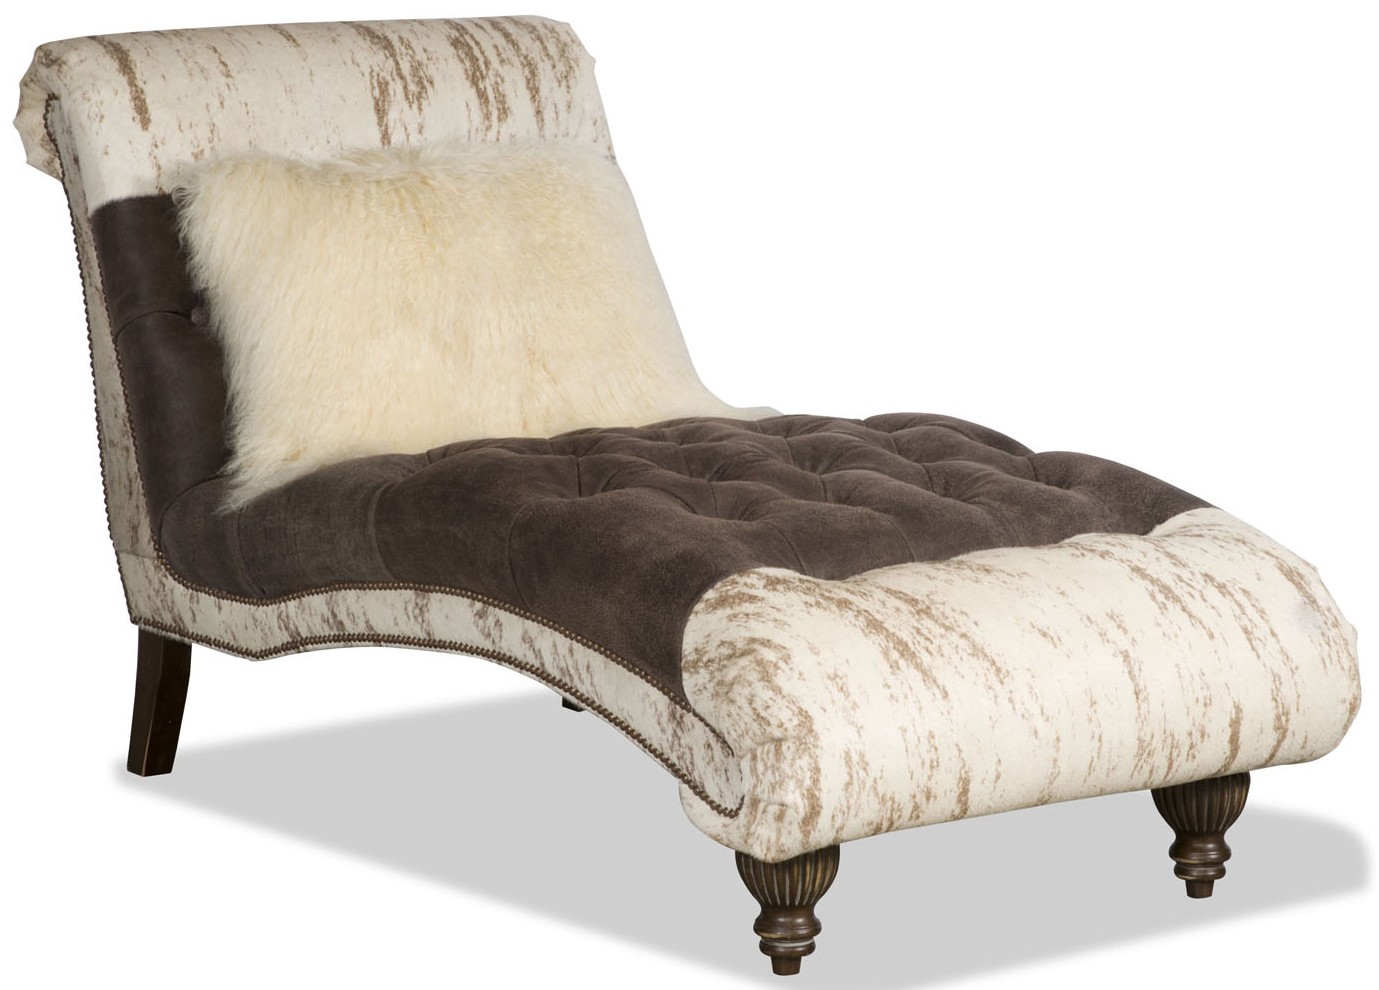 SETTEES, CHAISE, BENCHES Animal print chaise